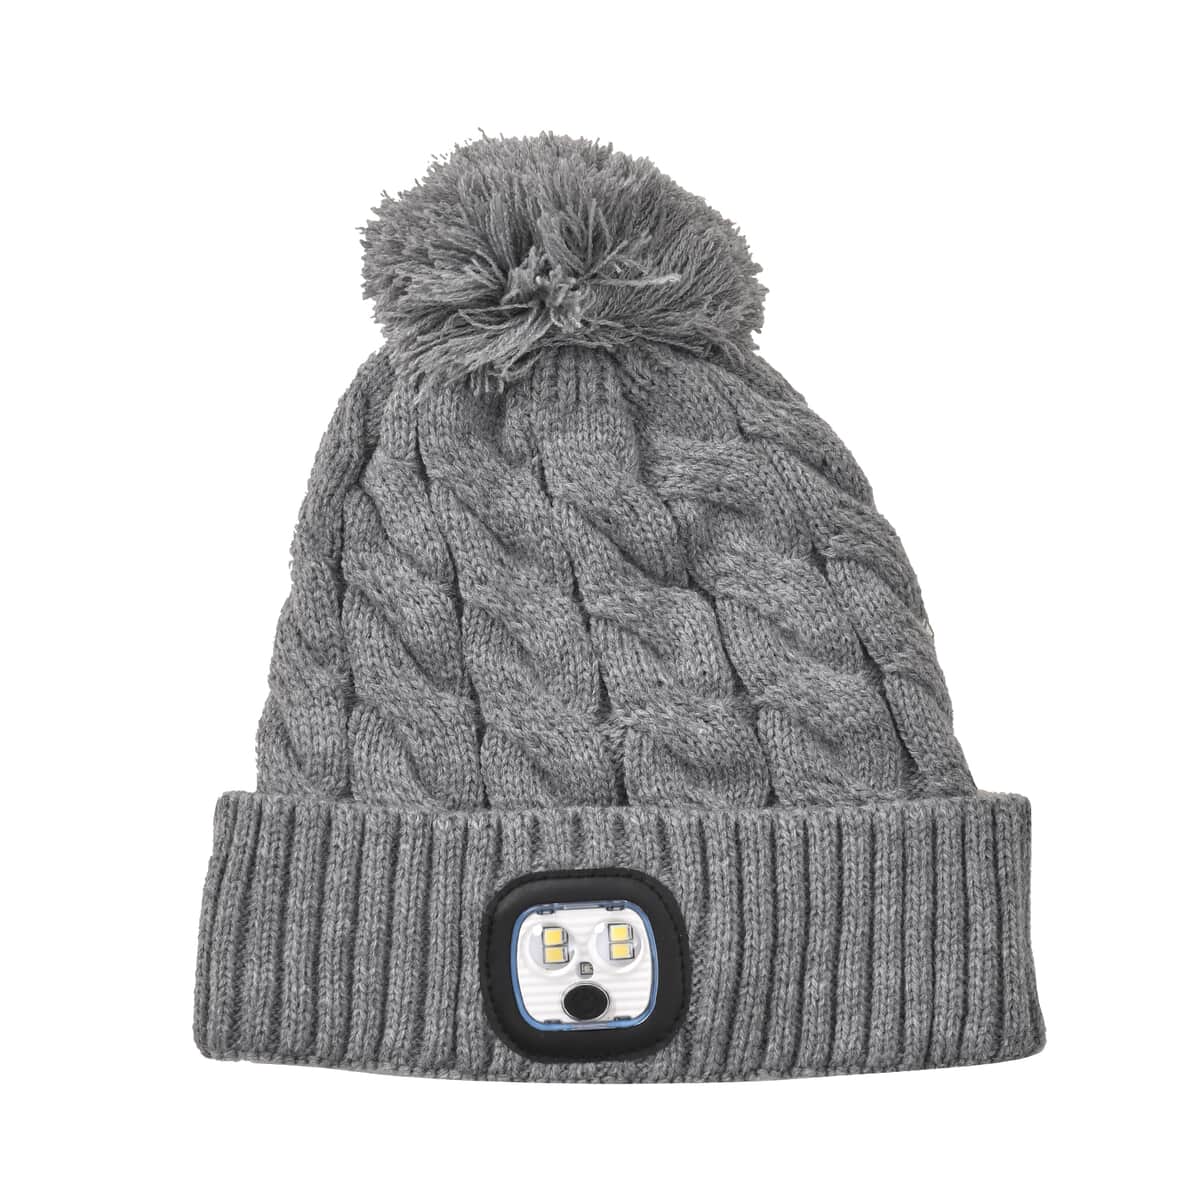 USB Rechargeable Waterproof LED Lighted Beanie Cap with Sherpa Lining and with Faux fur Bubble - Gray image number 3